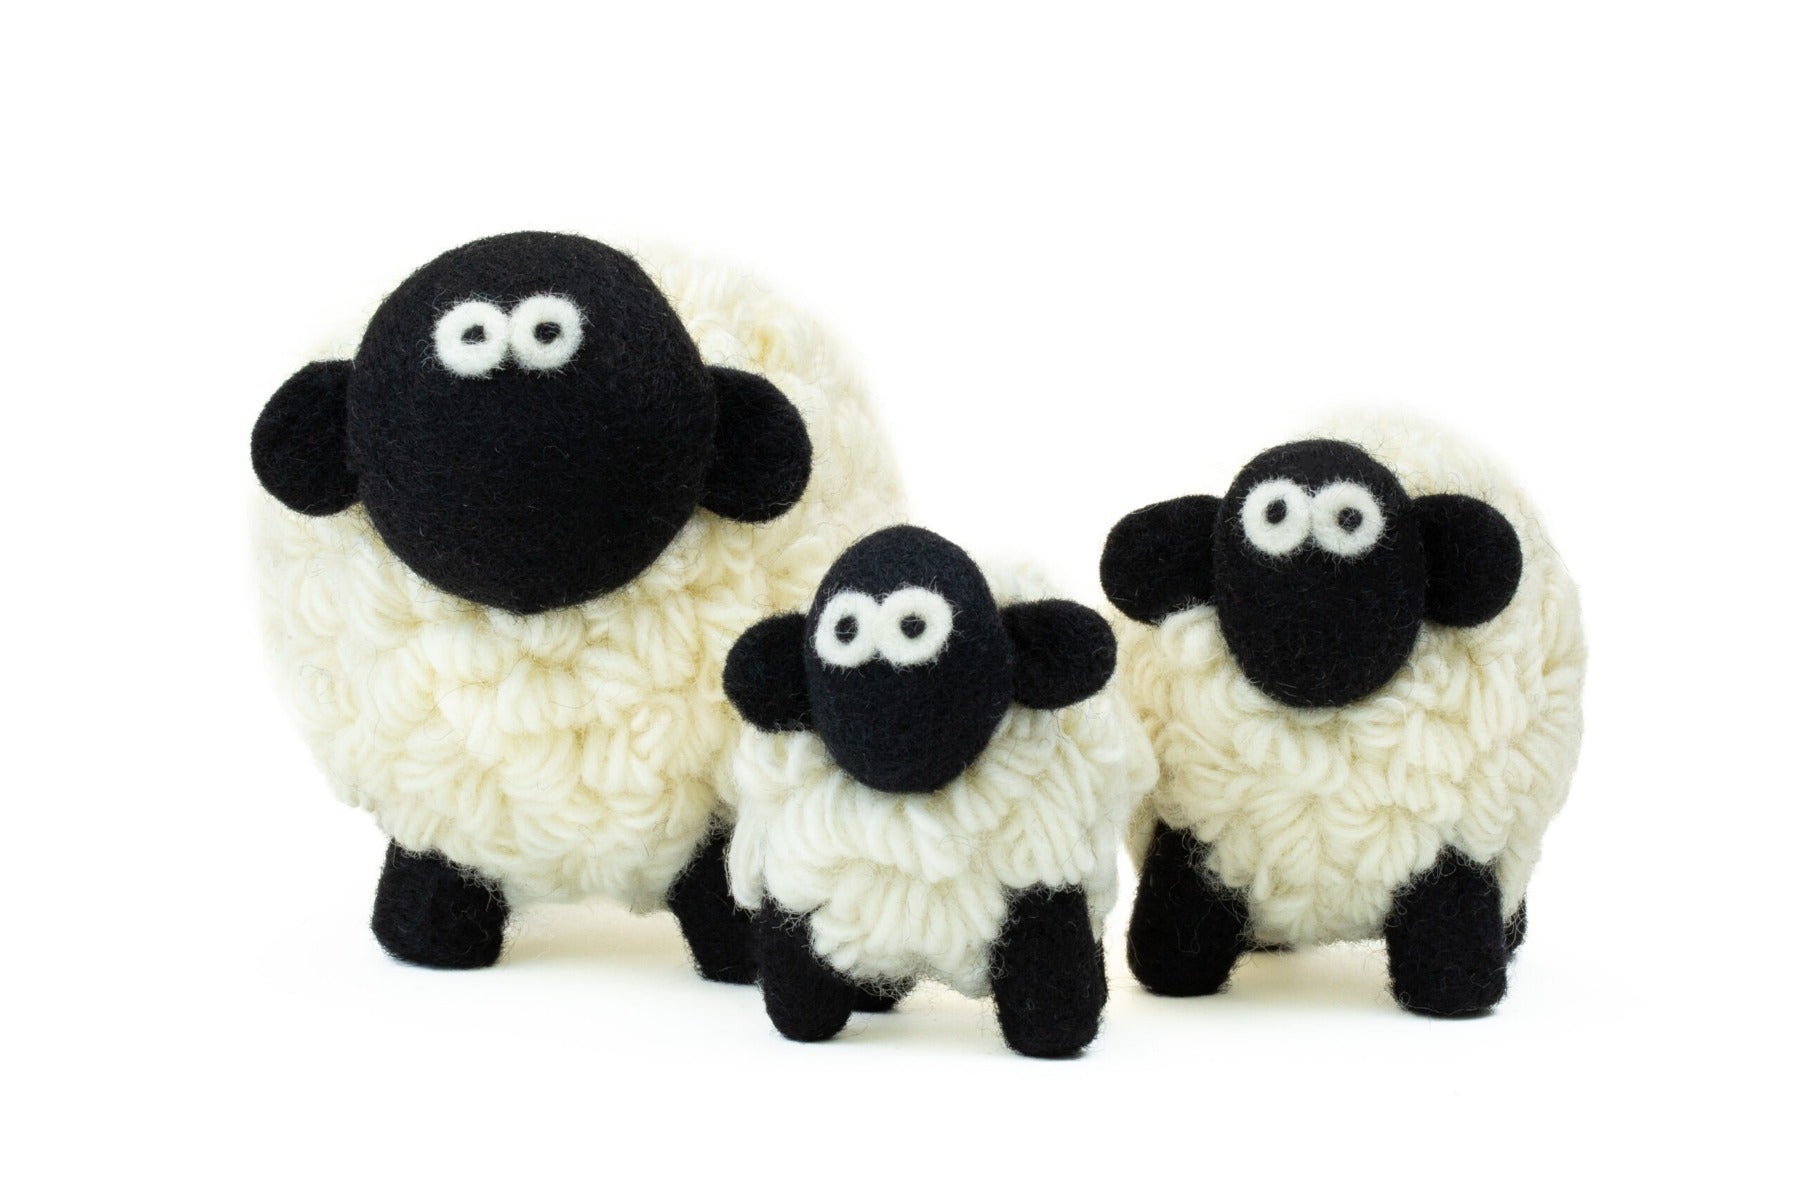 Erin Knitwear | Knitted Sheep Collectible Mountain Small